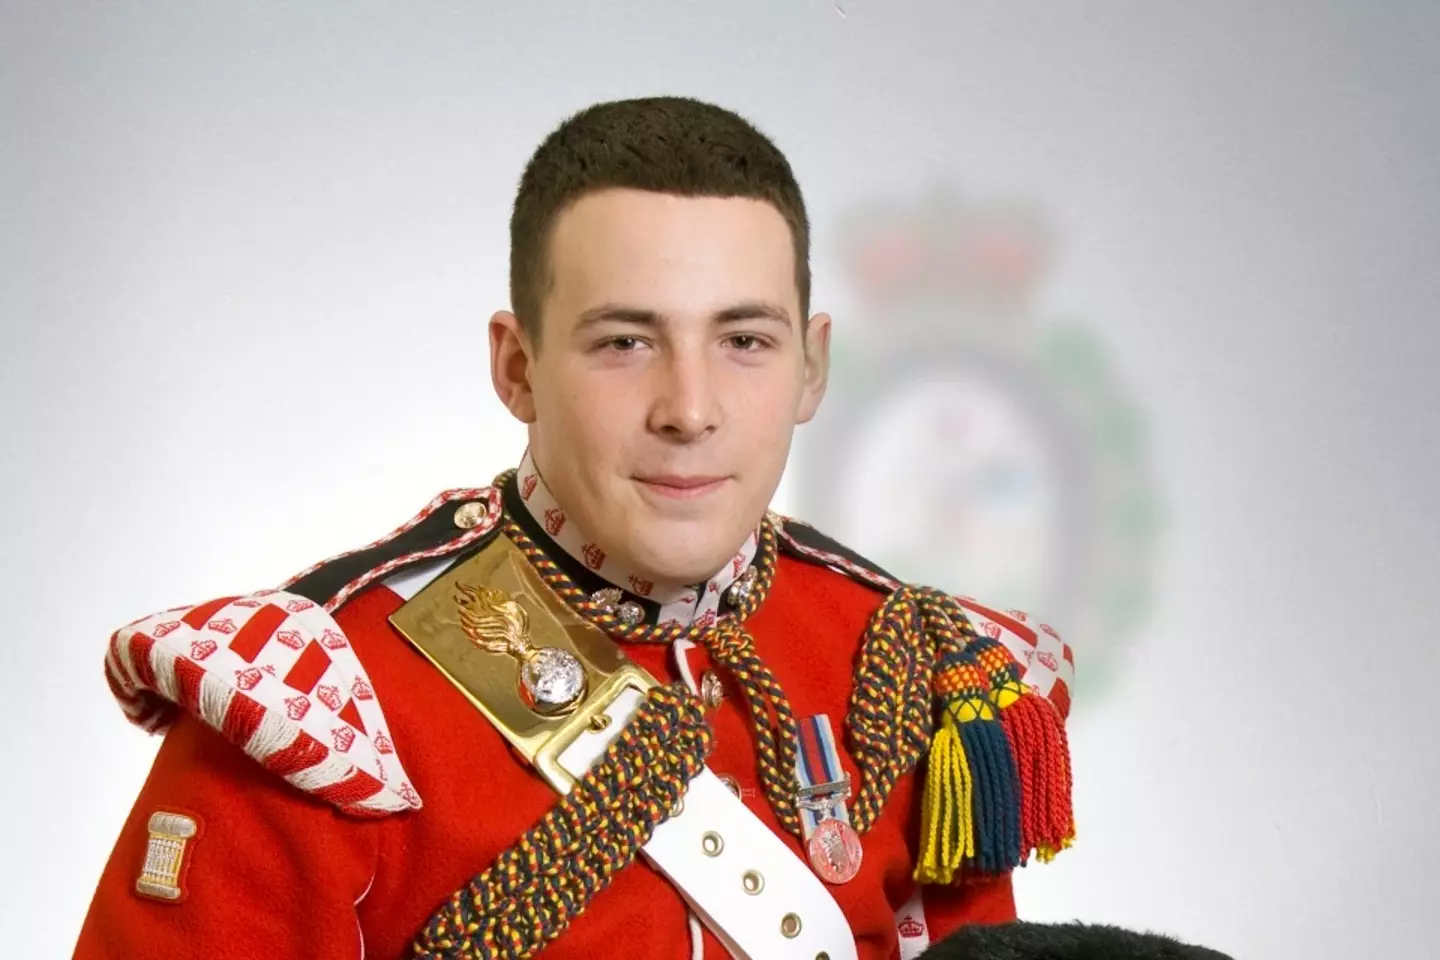 Lee Rigby was murdered 10 years ago today.